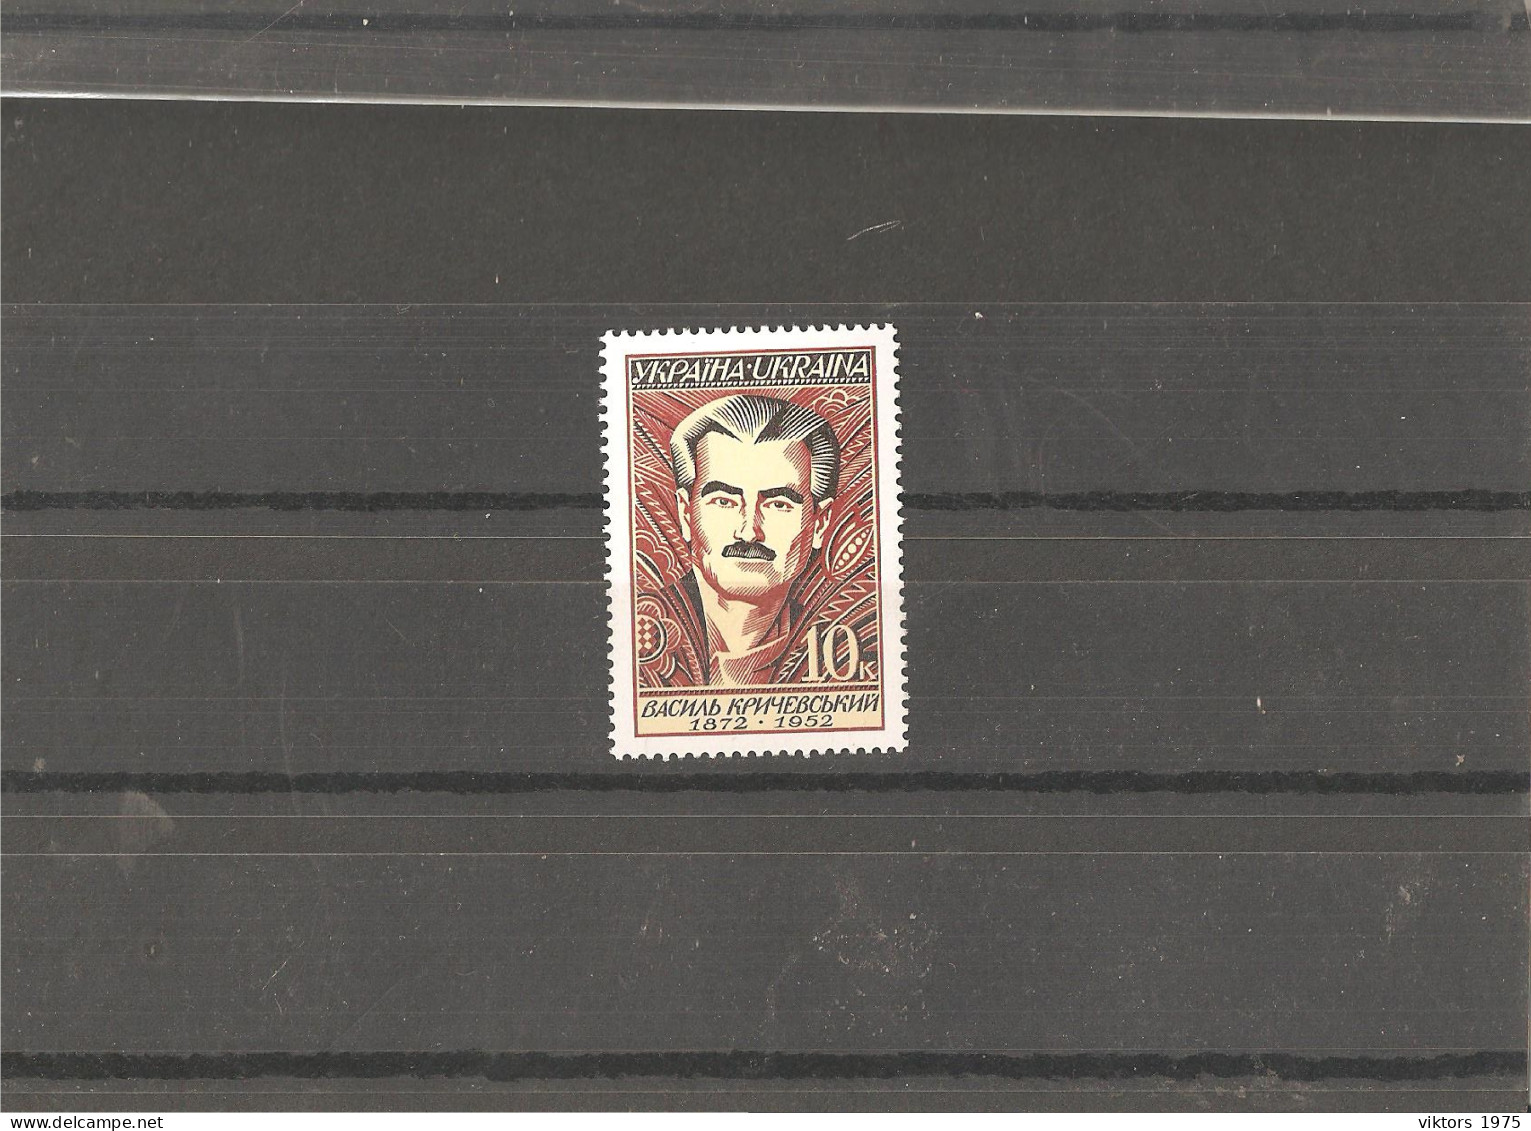 MNH Stamp Nr.234 In MICHEL Catalog - Ucrania